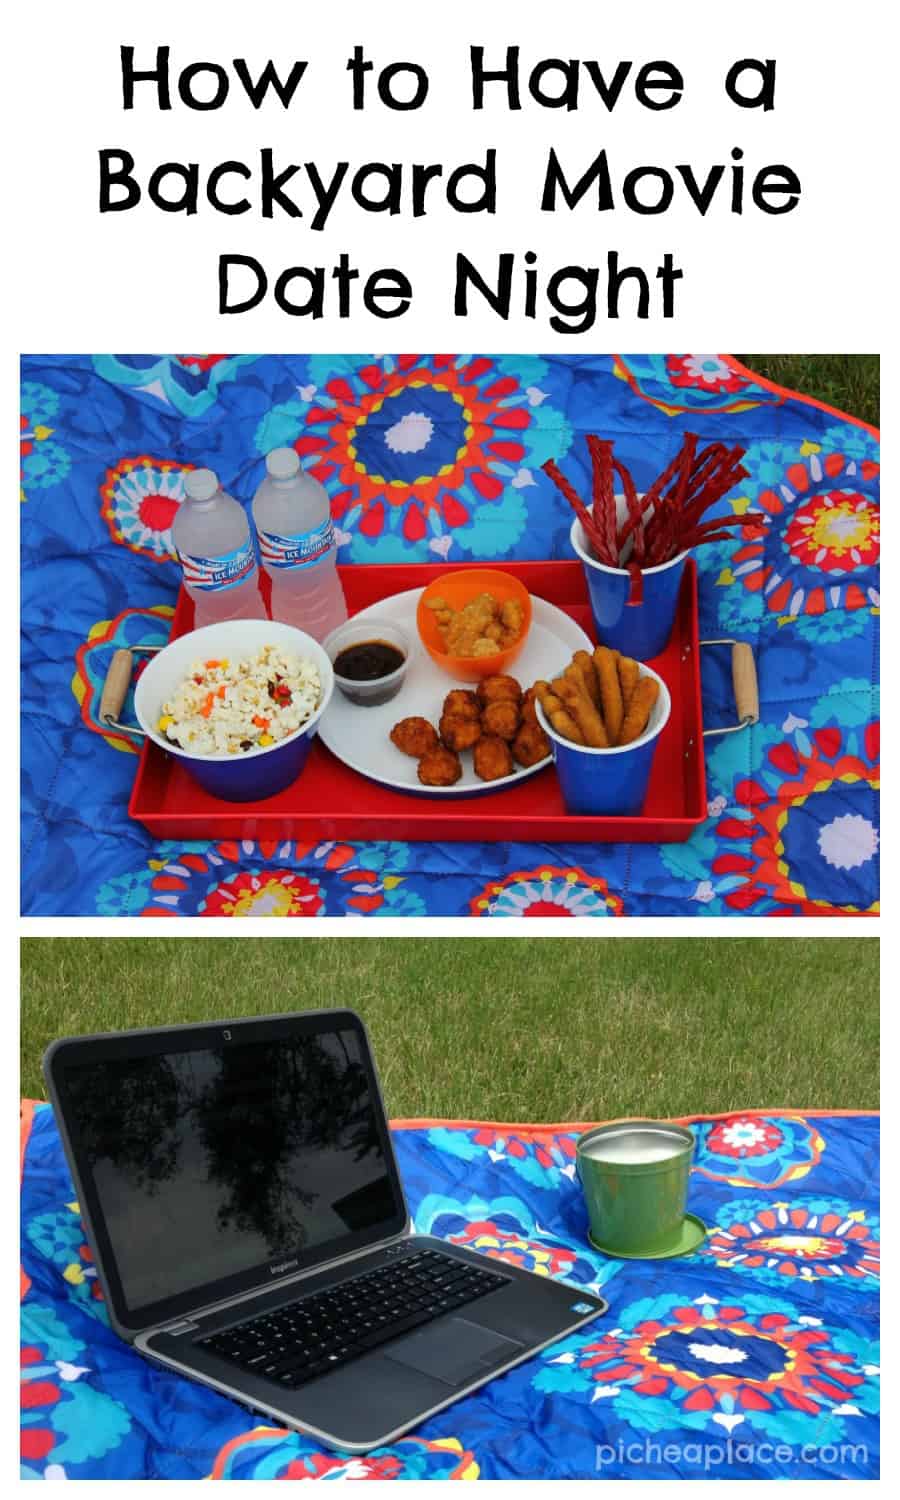 How to Have a Backyard Movie Date Night